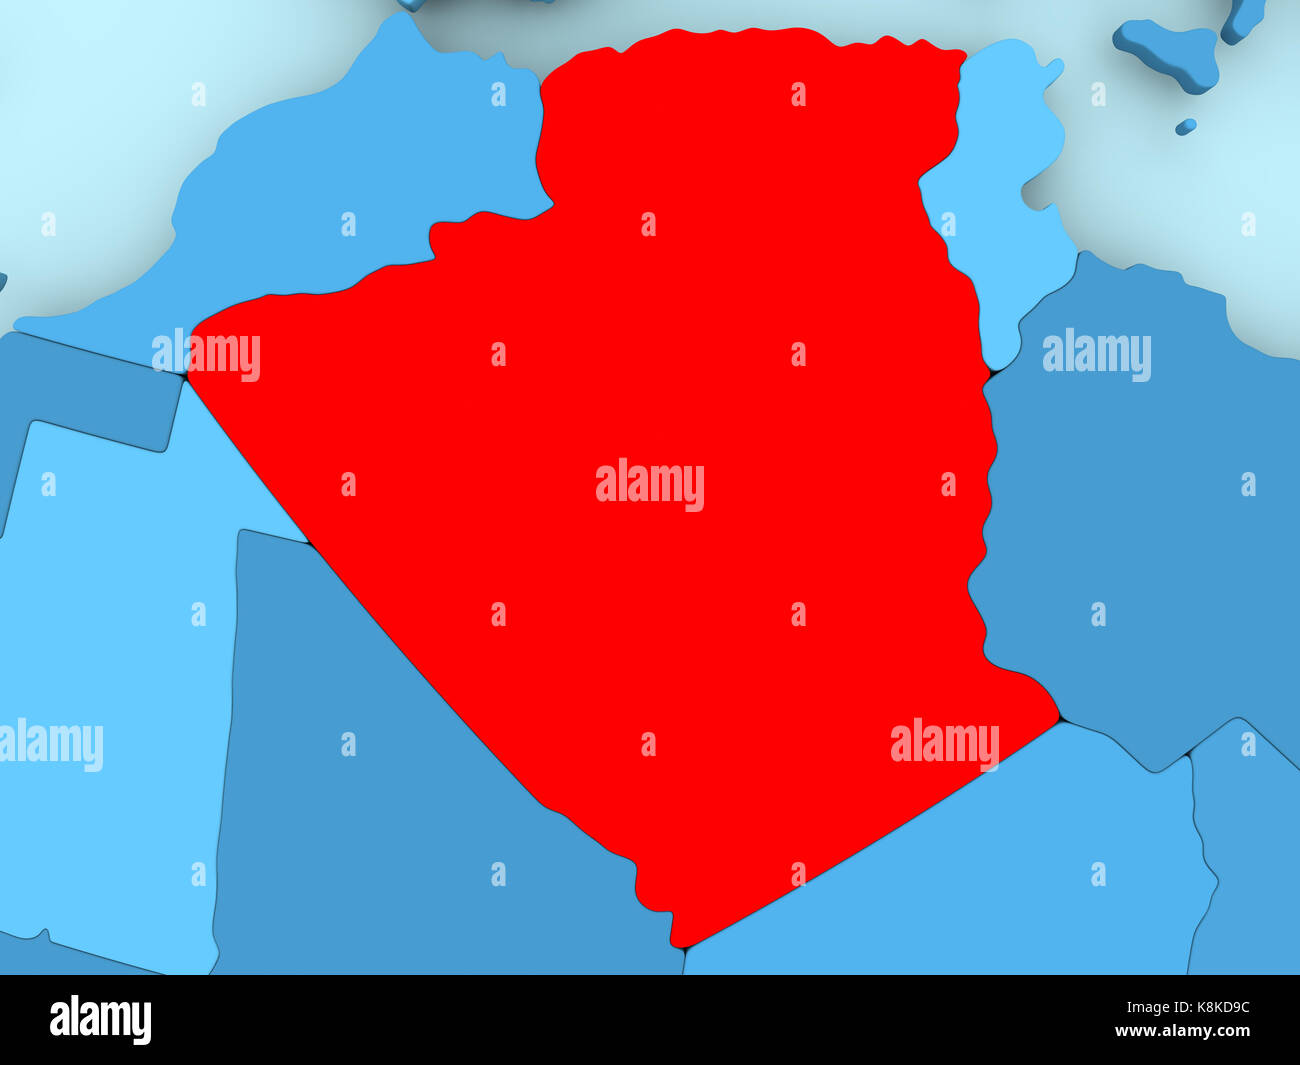 Algeria in red on blue political map. 3D illustration. Stock Photo